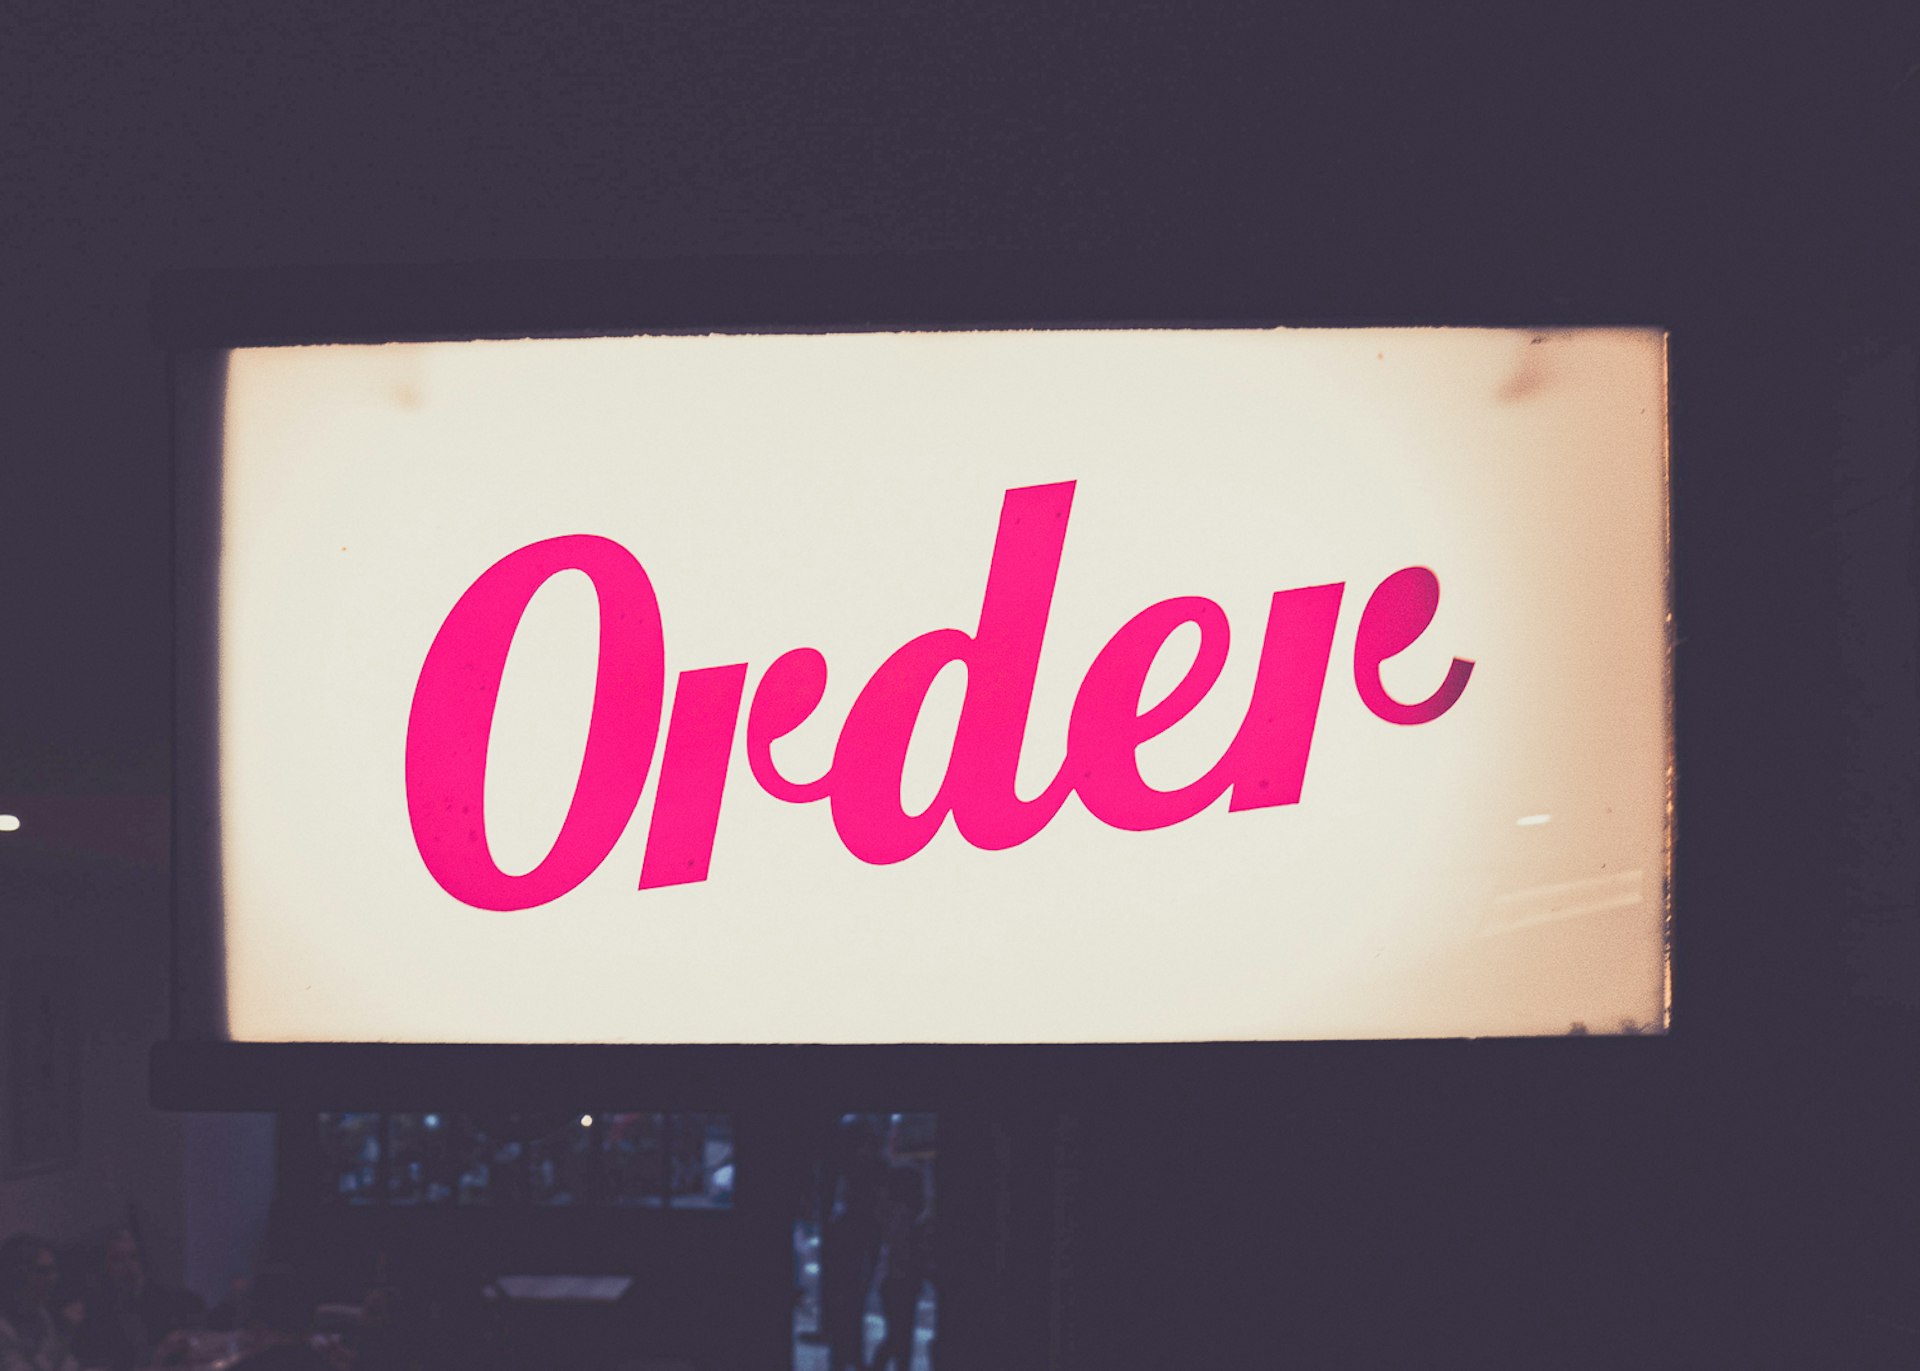 A white back-lit sign is sitting against a dark background, with the word 'Order' running across it diagonally (from bottom left to top right) in pink script. 